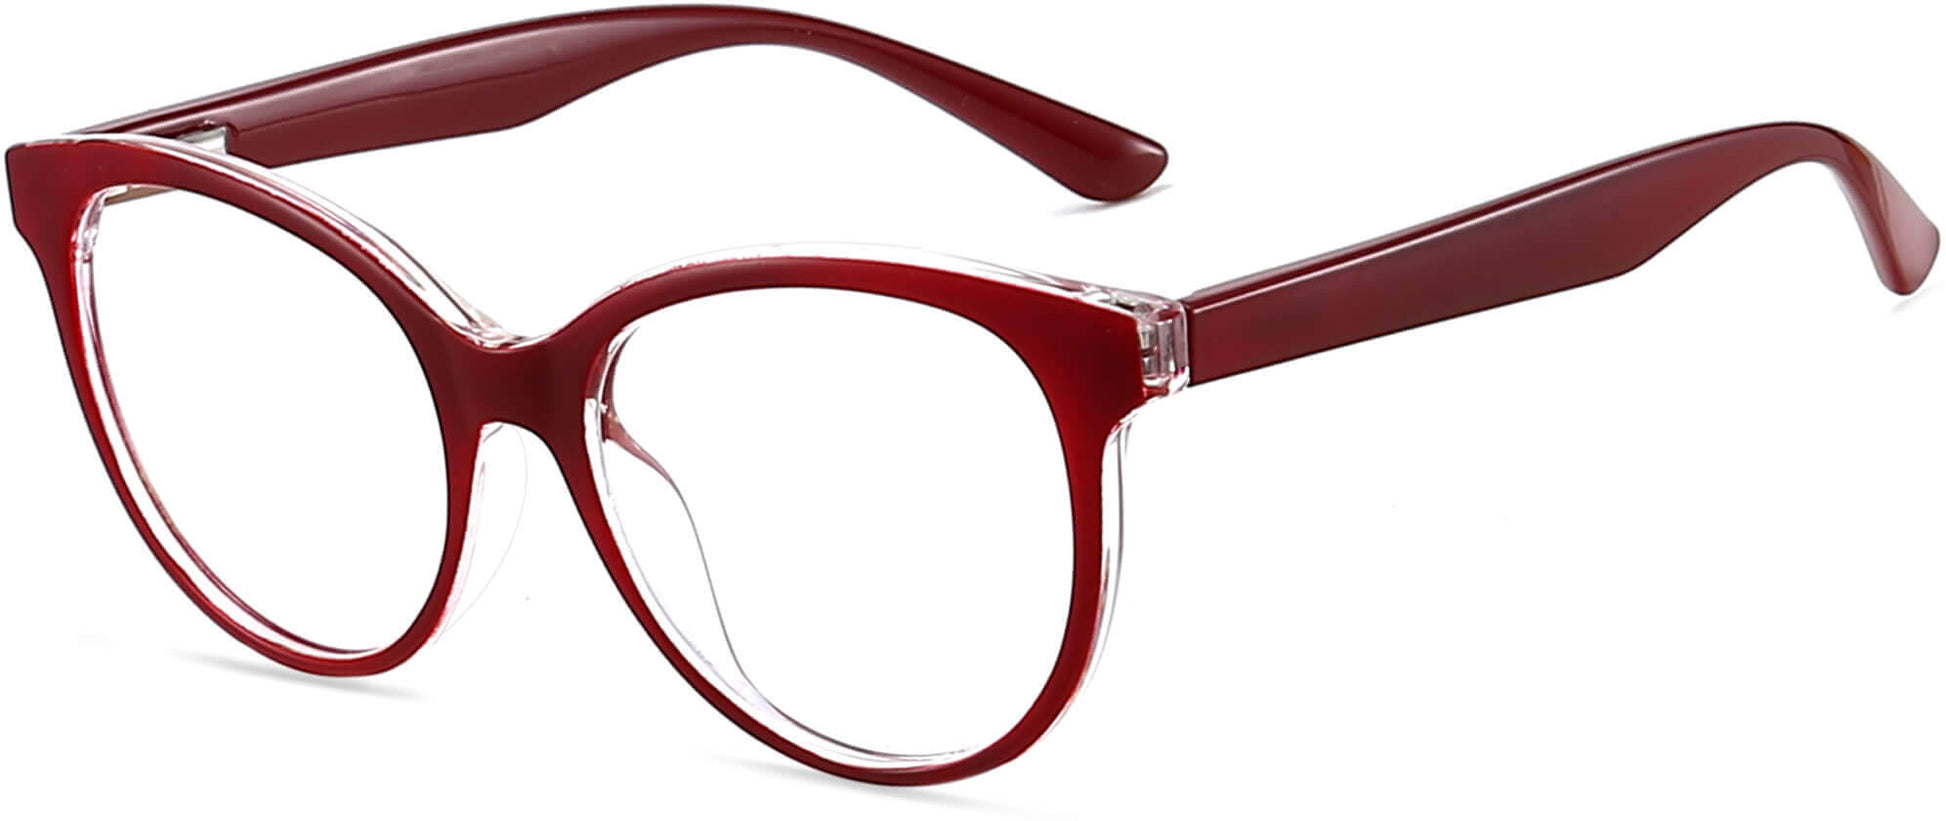 Remy Cateye Red Eyeglasses from ANRRI, angle view